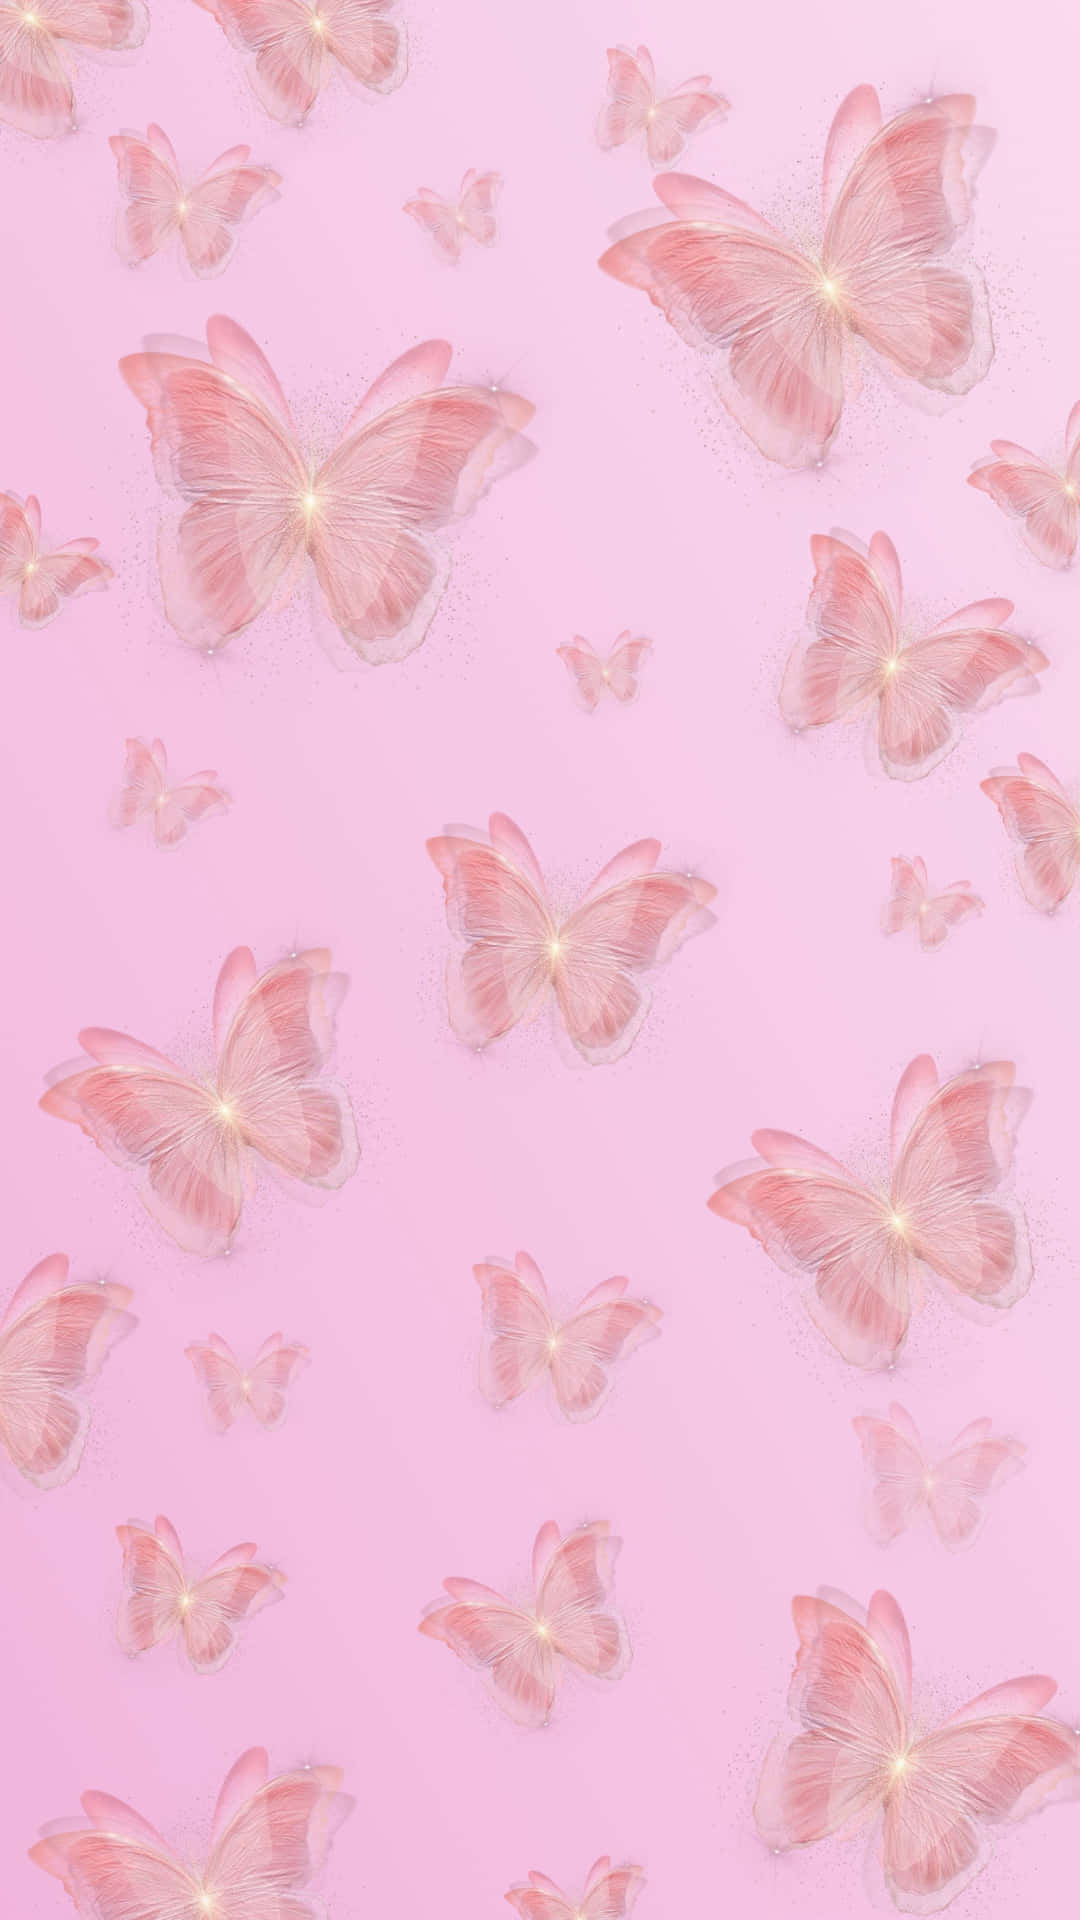 Caption: Enchanting Pink Butterfly Background